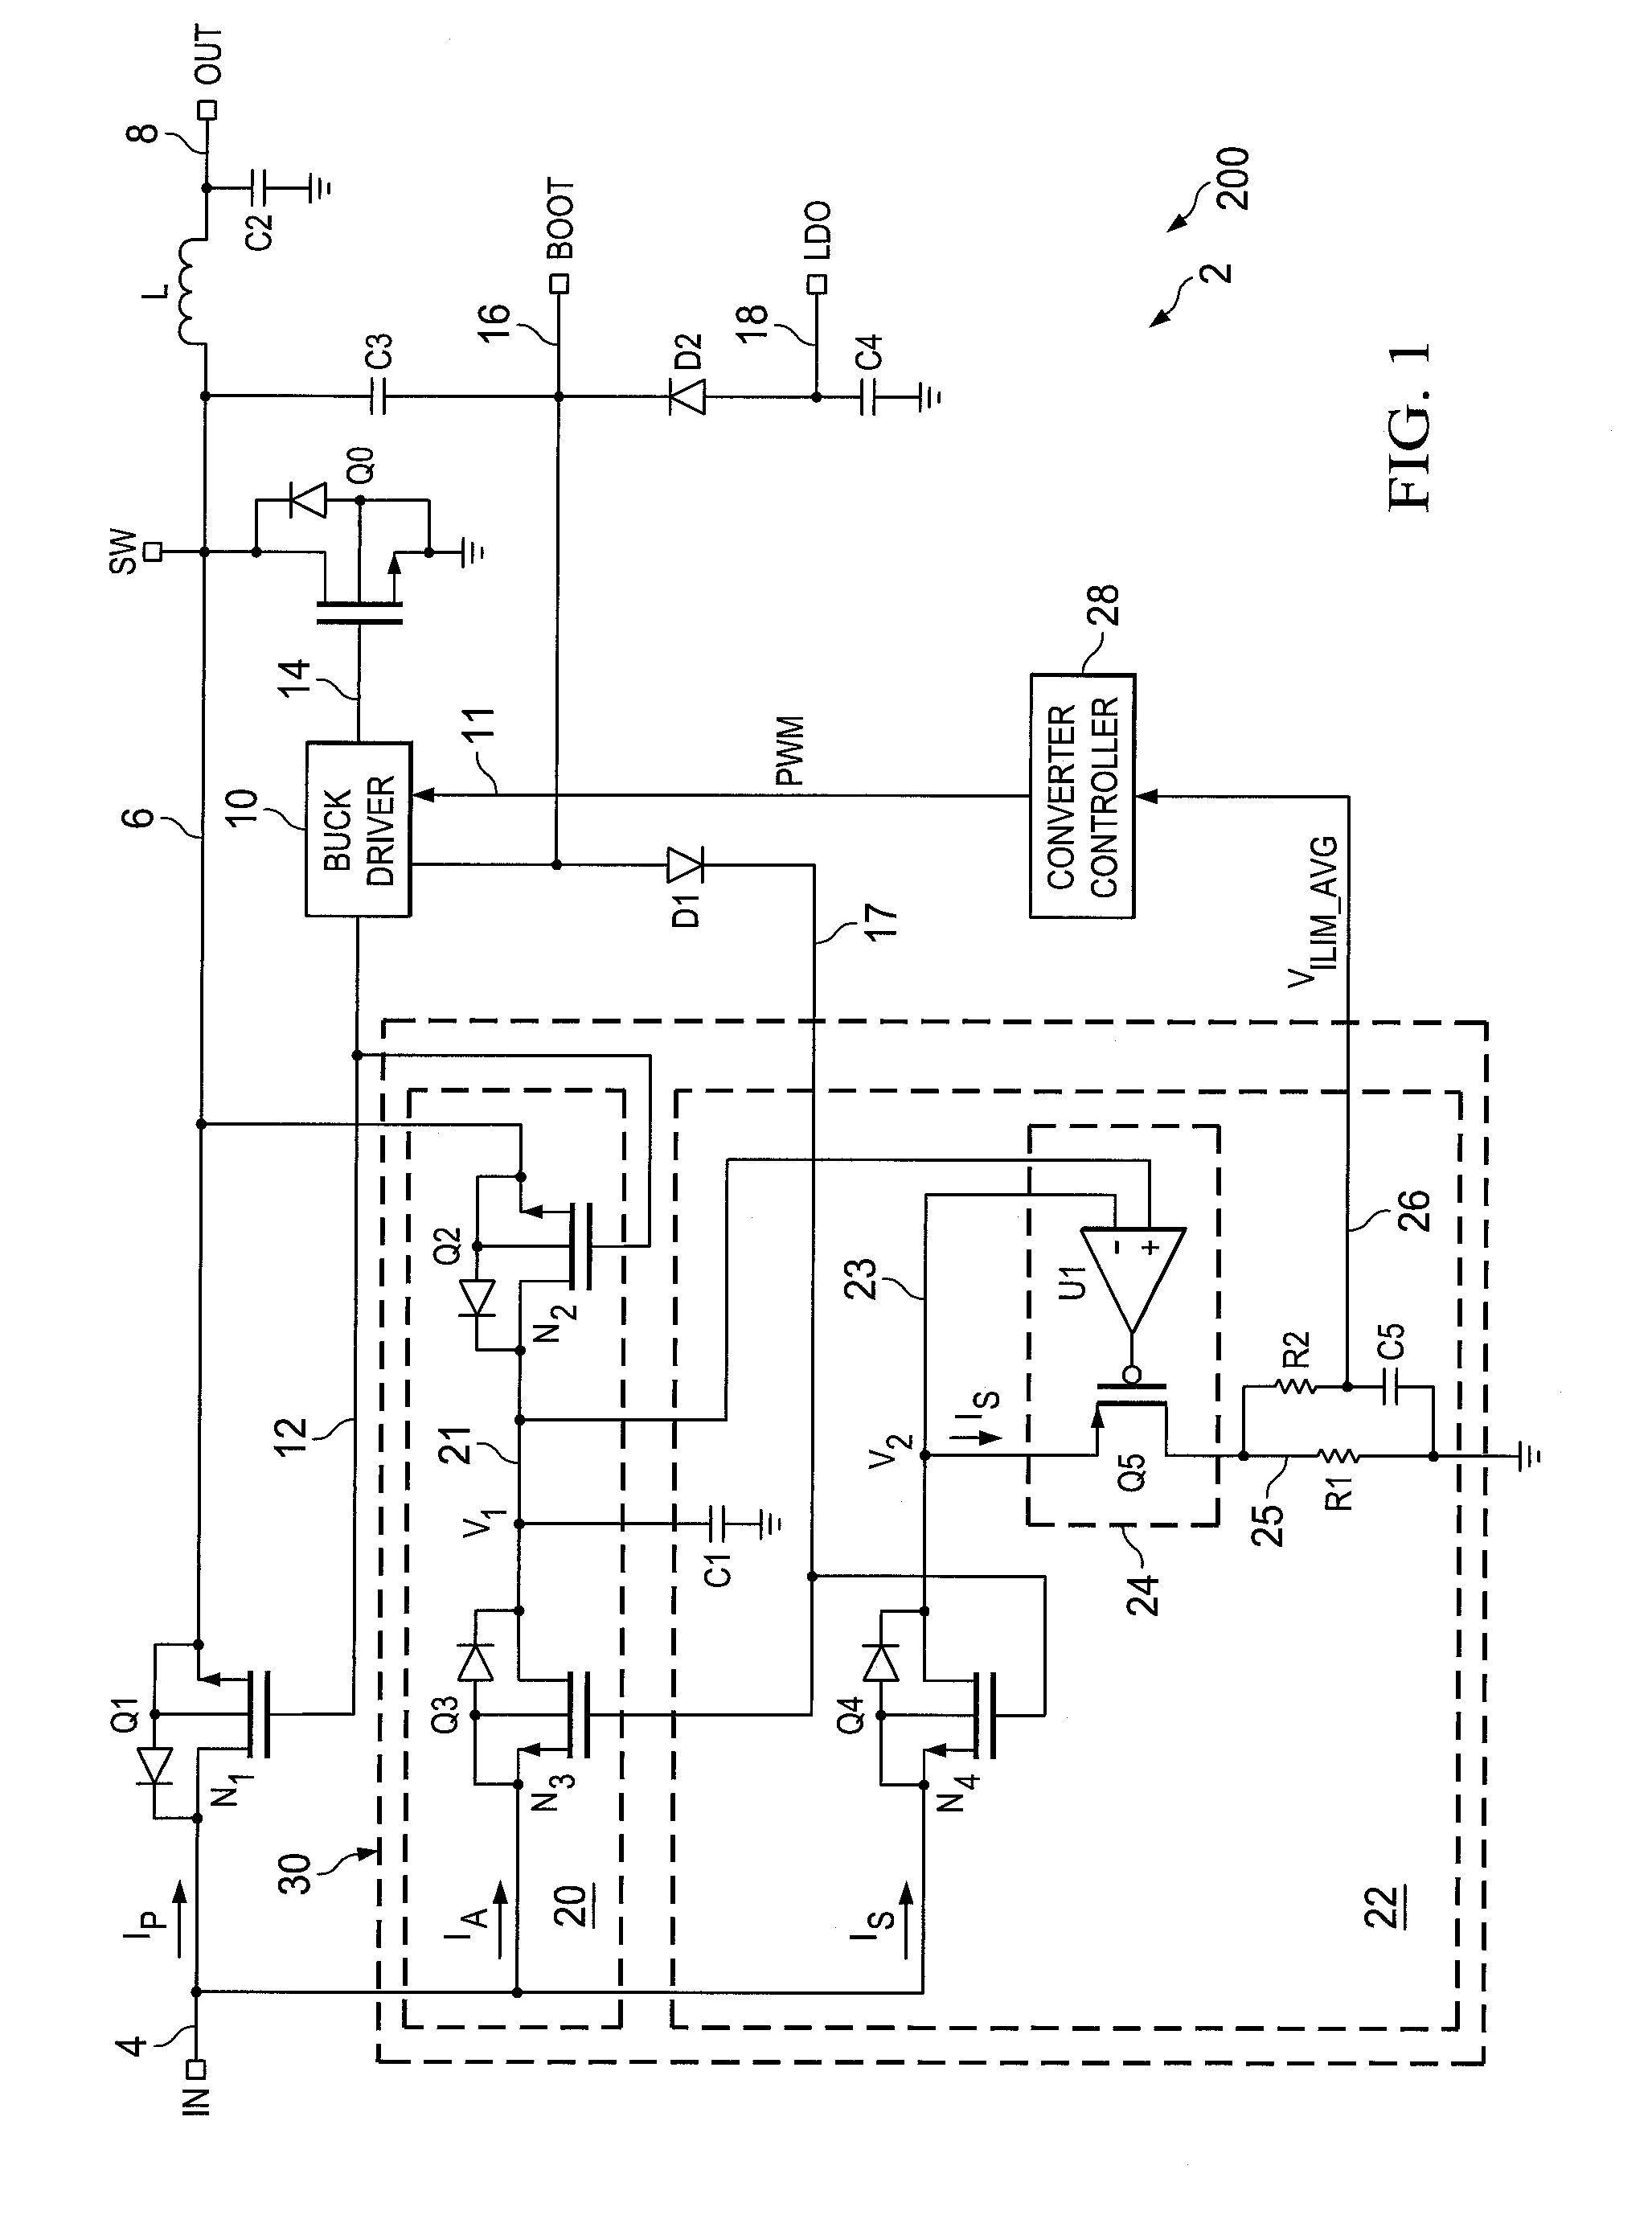 Switch mode power converter current sensing apparatus and method